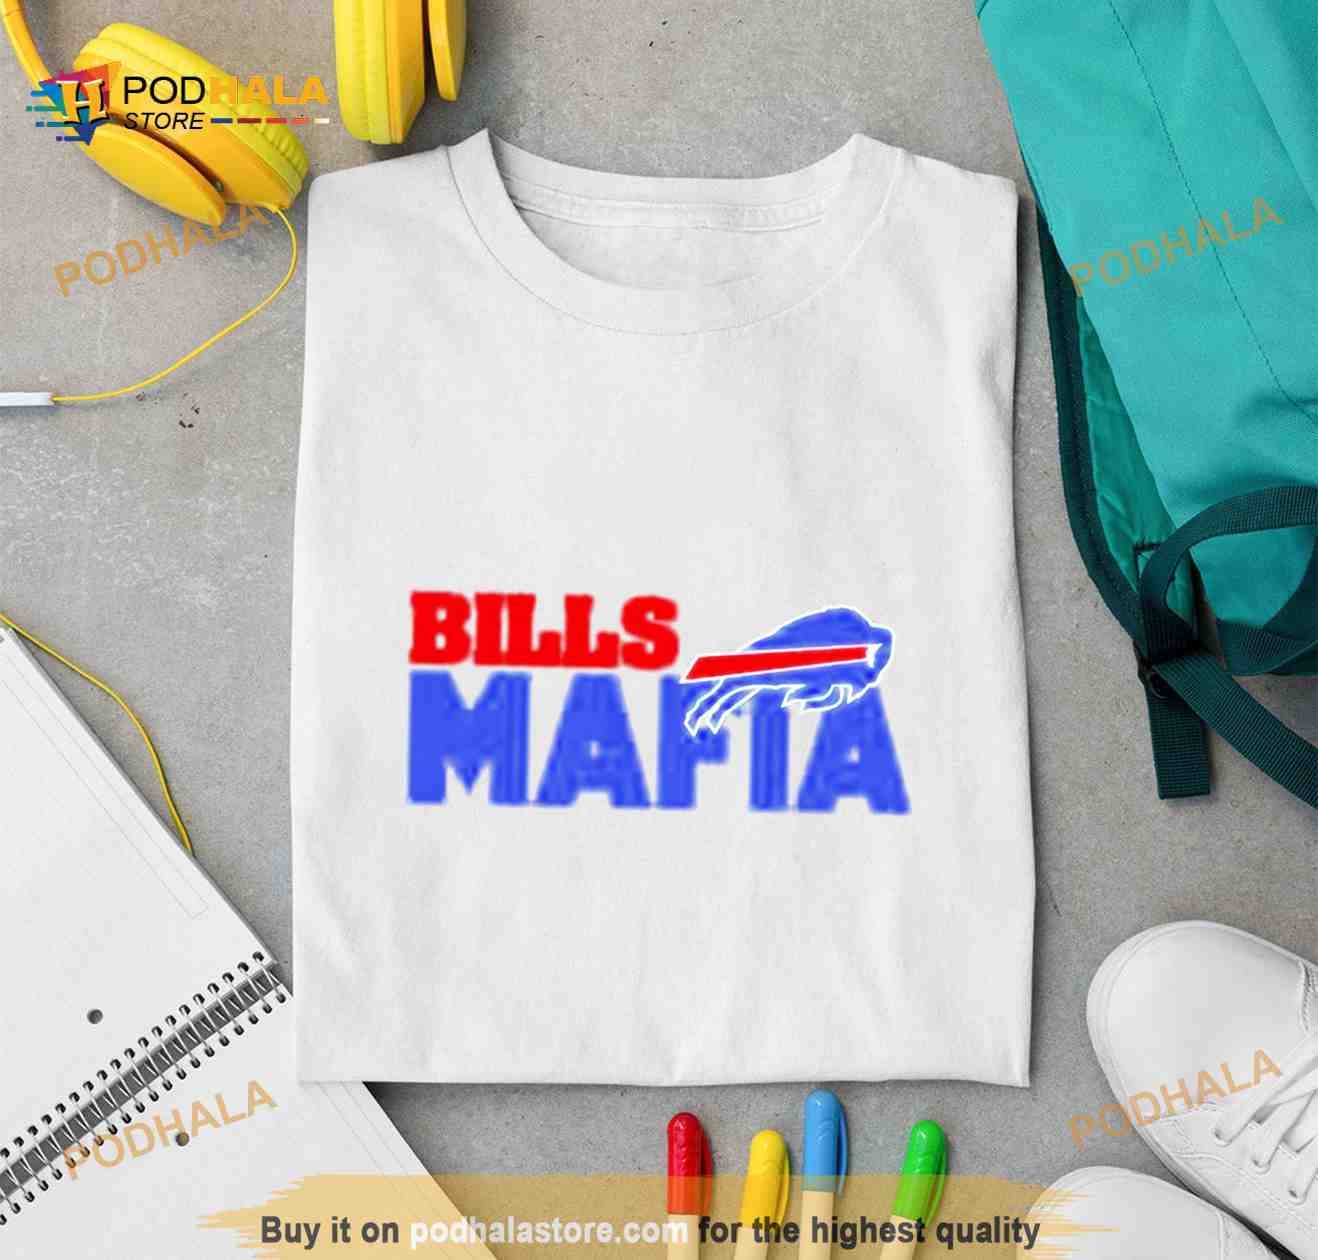 Buffalo Bills NFL Team Apparel Toddler and Youth Graphic Hoodie